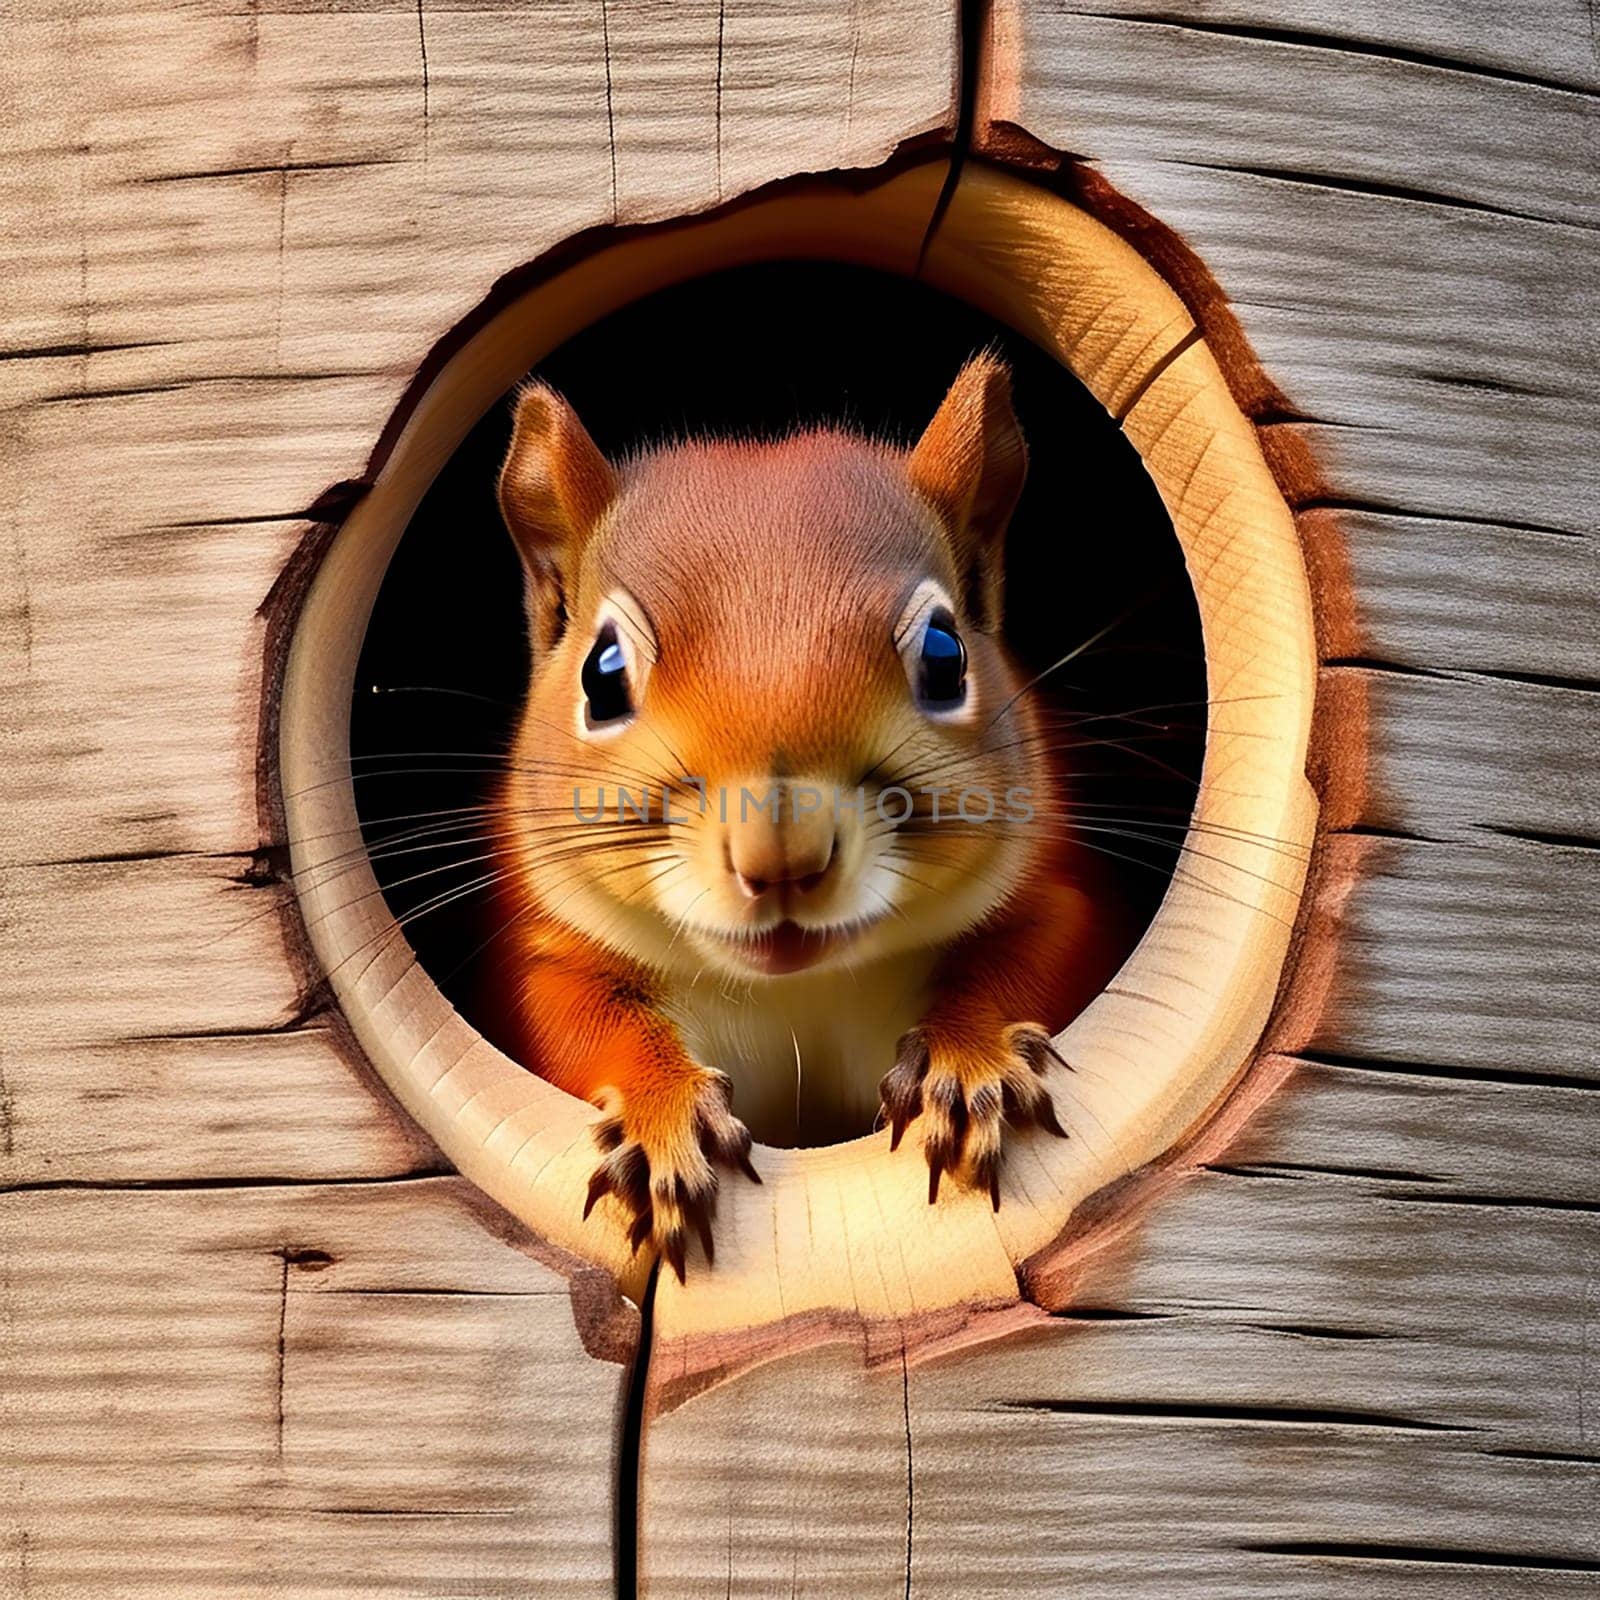 Baby Red Squirrel Peeking Out of Wood Hole